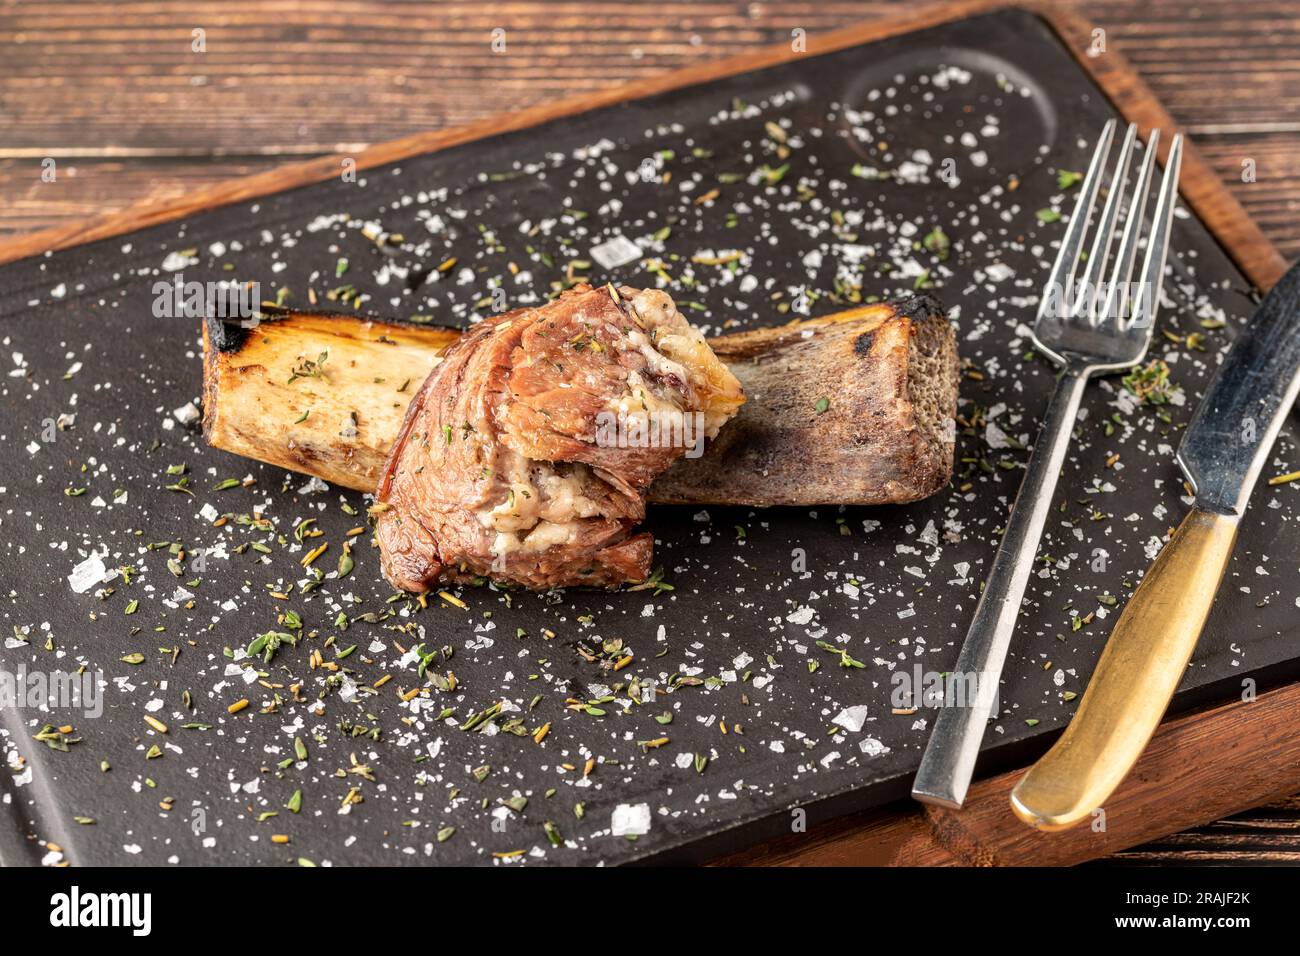 Beef rib asado on stone cutting board at steakhouse Stock Photo